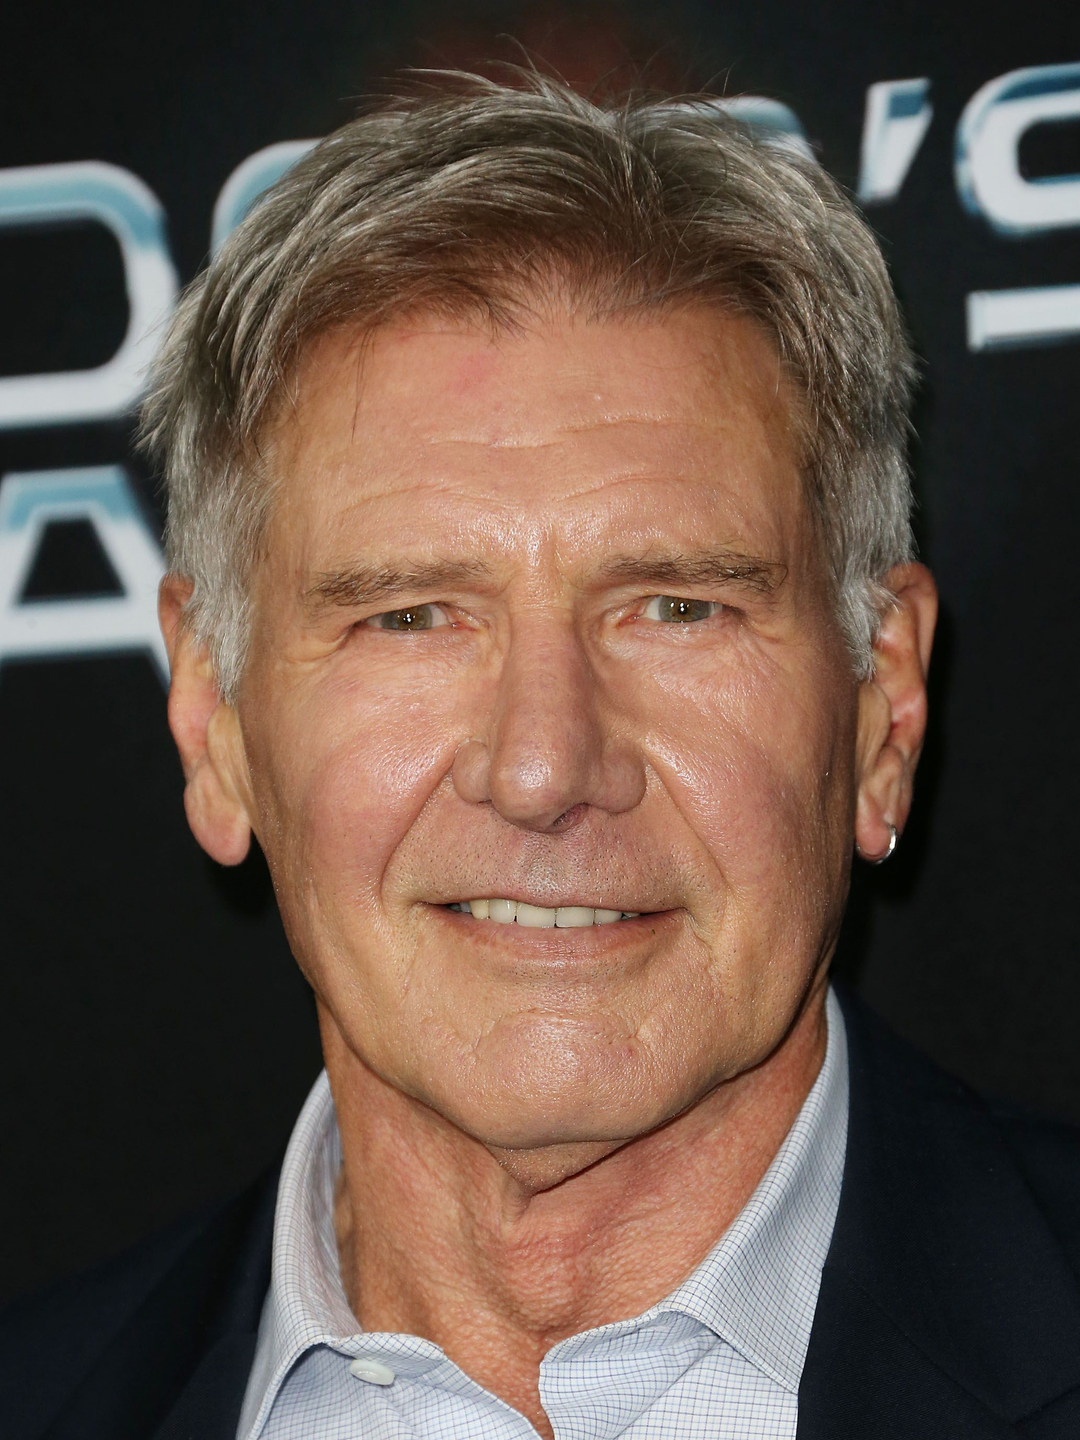 Harrison Ford young pics